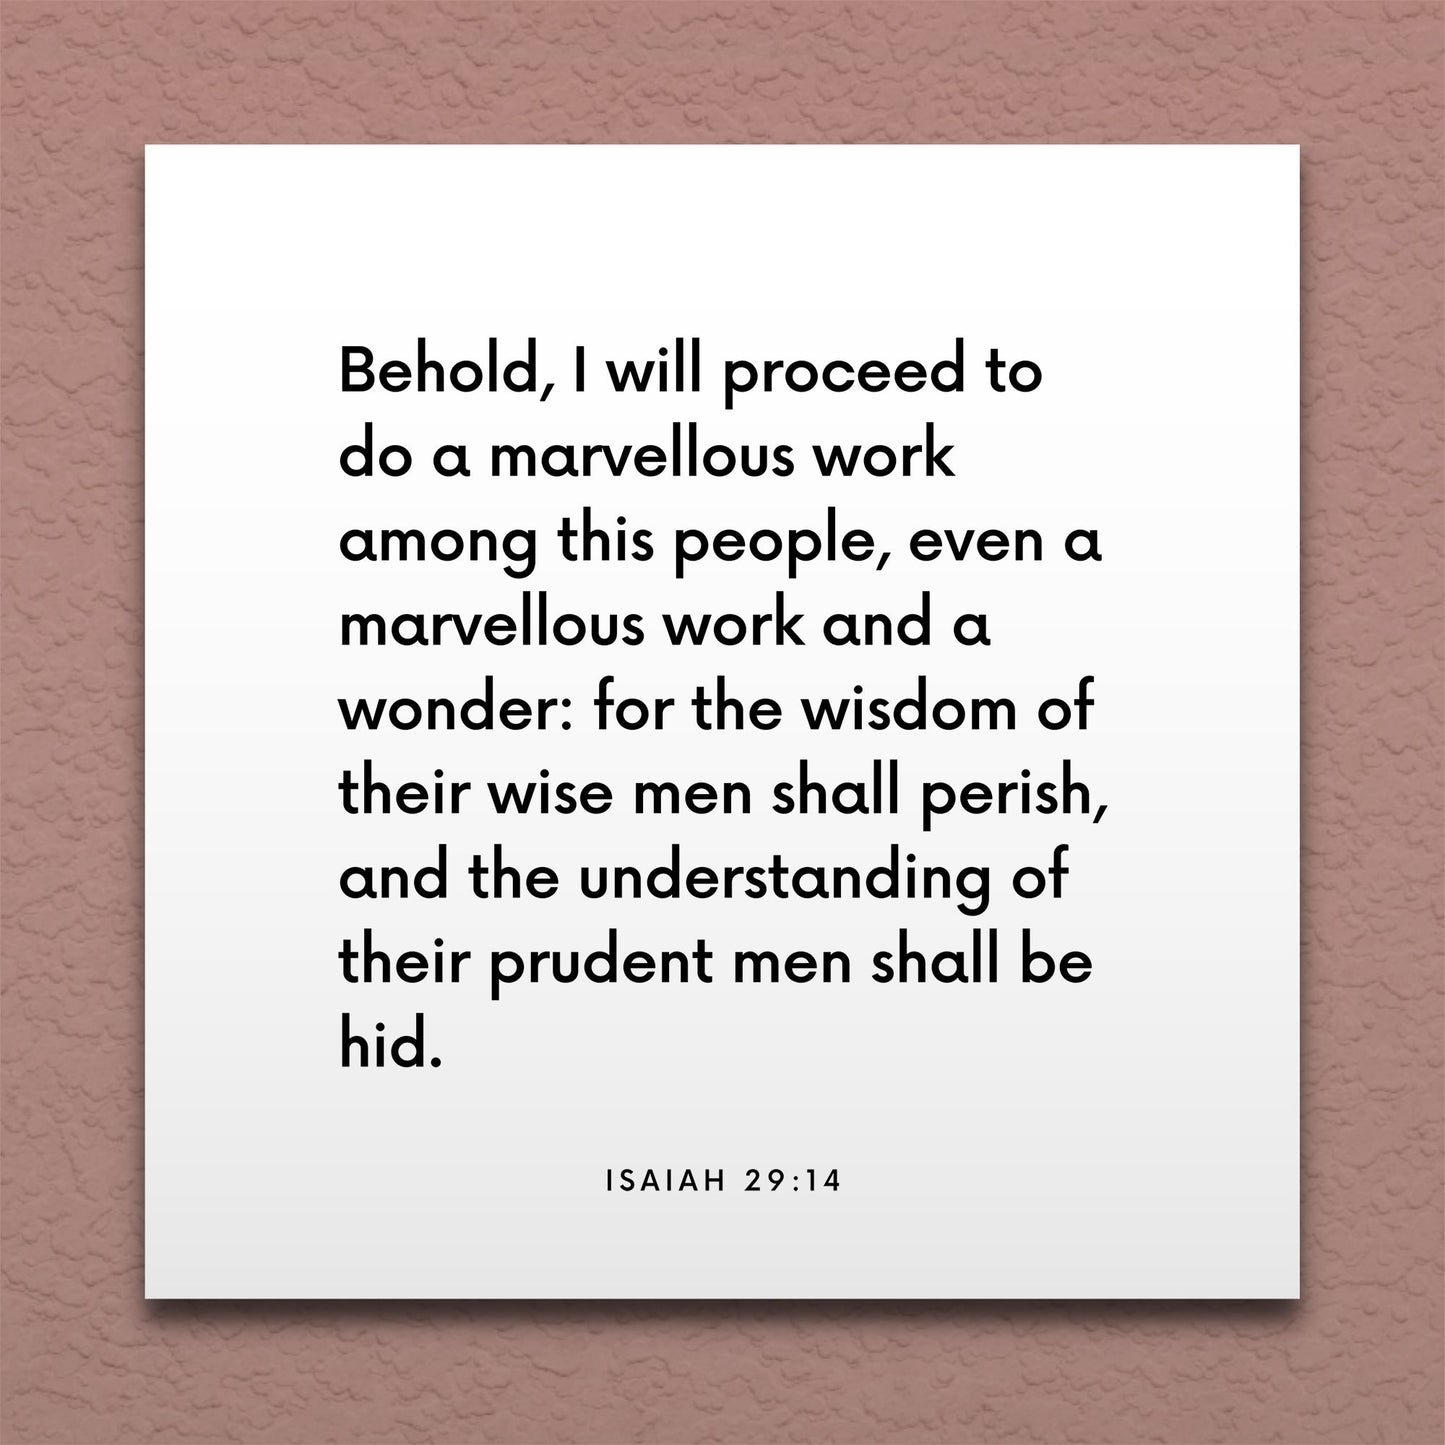 Wall-mounted scripture tile for Isaiah 29:14 - "I will do a marvellous work and a wonder"